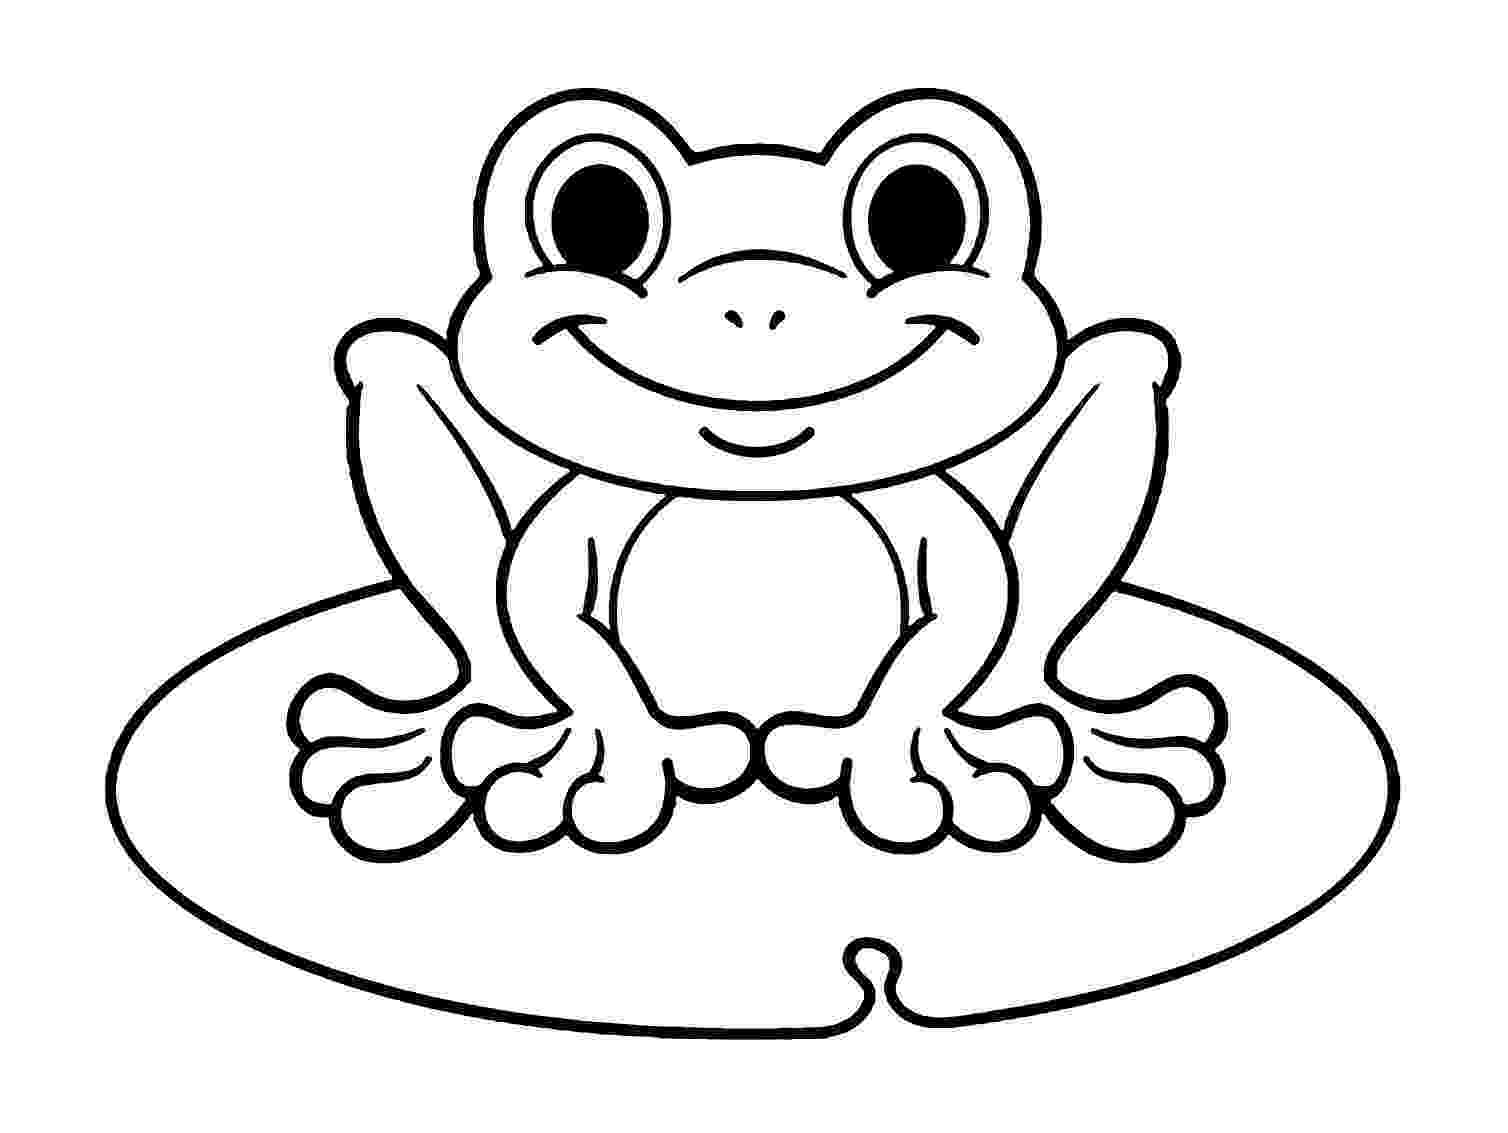 frogs coloring pages free printable frog coloring pages for kids cool2bkids coloring frogs pages 